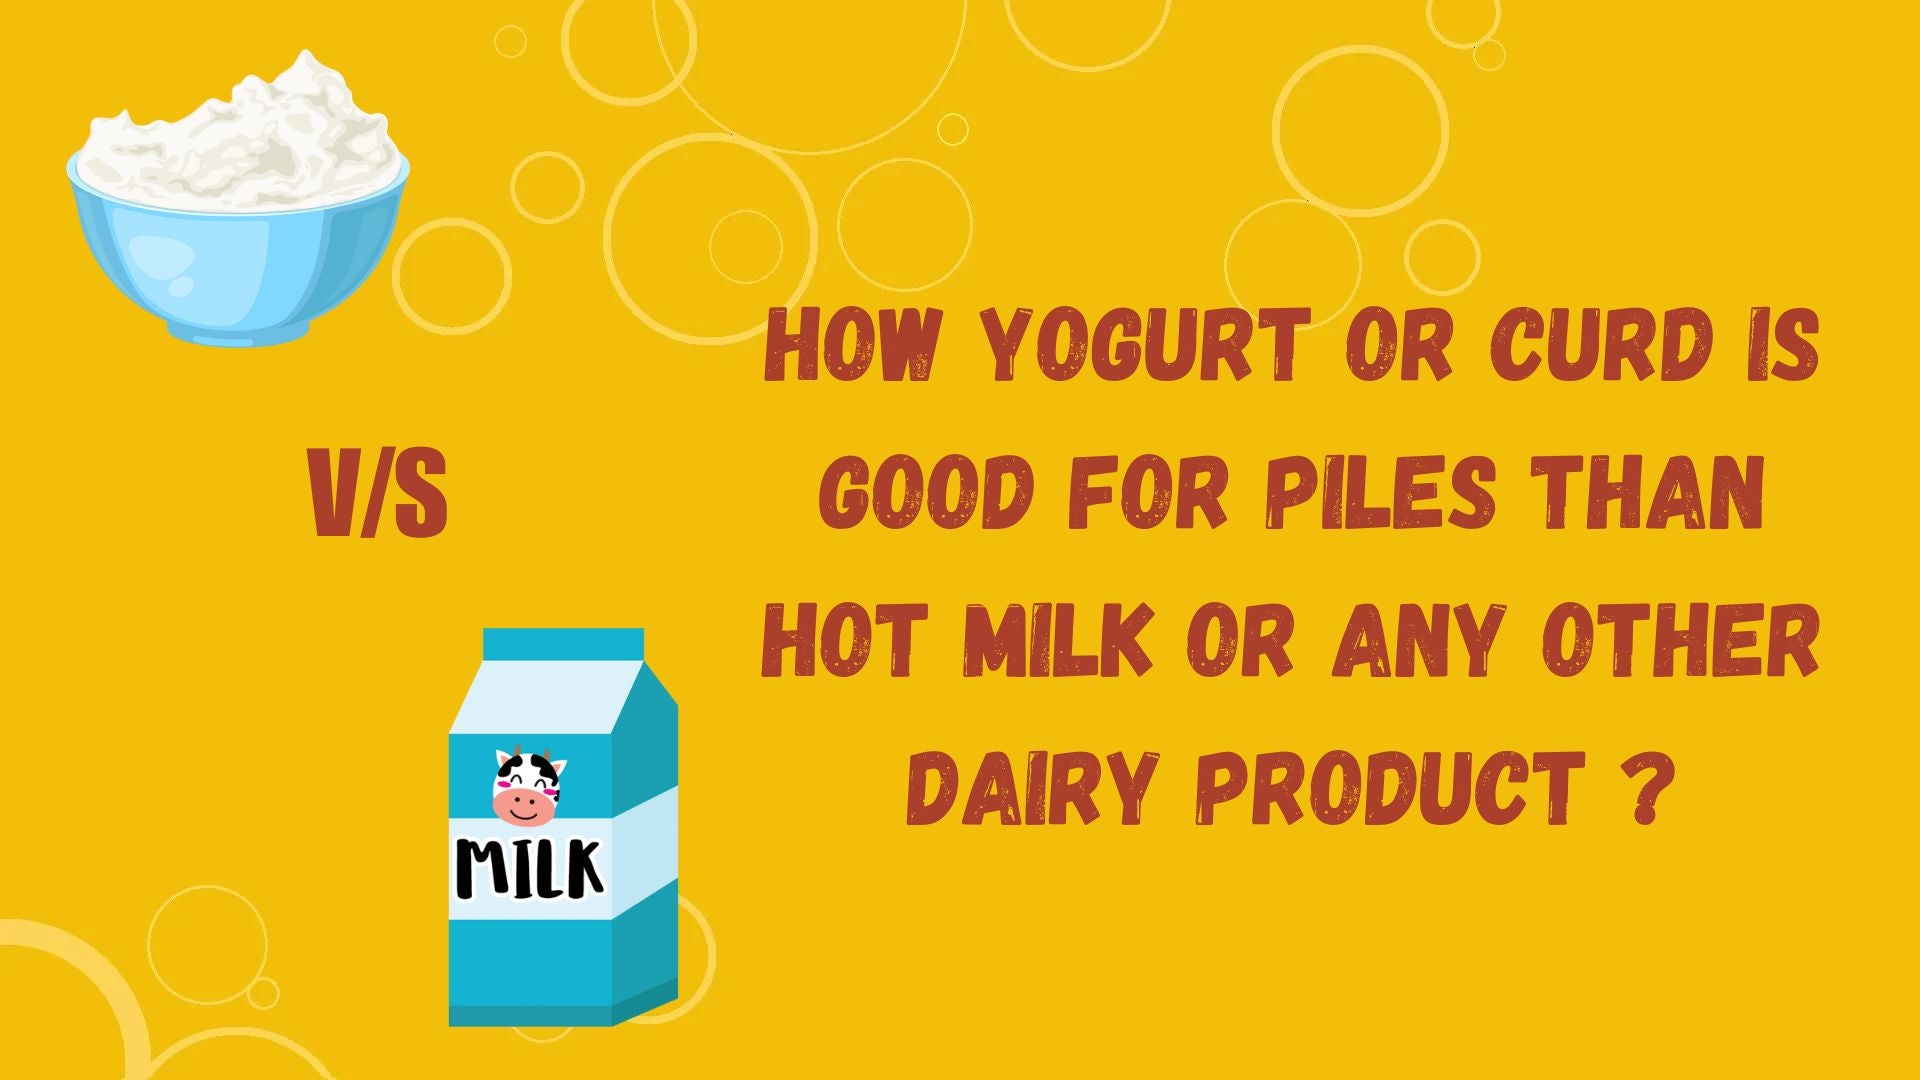 How yogurt or curd is good for piles than hot milk or any other dairy product